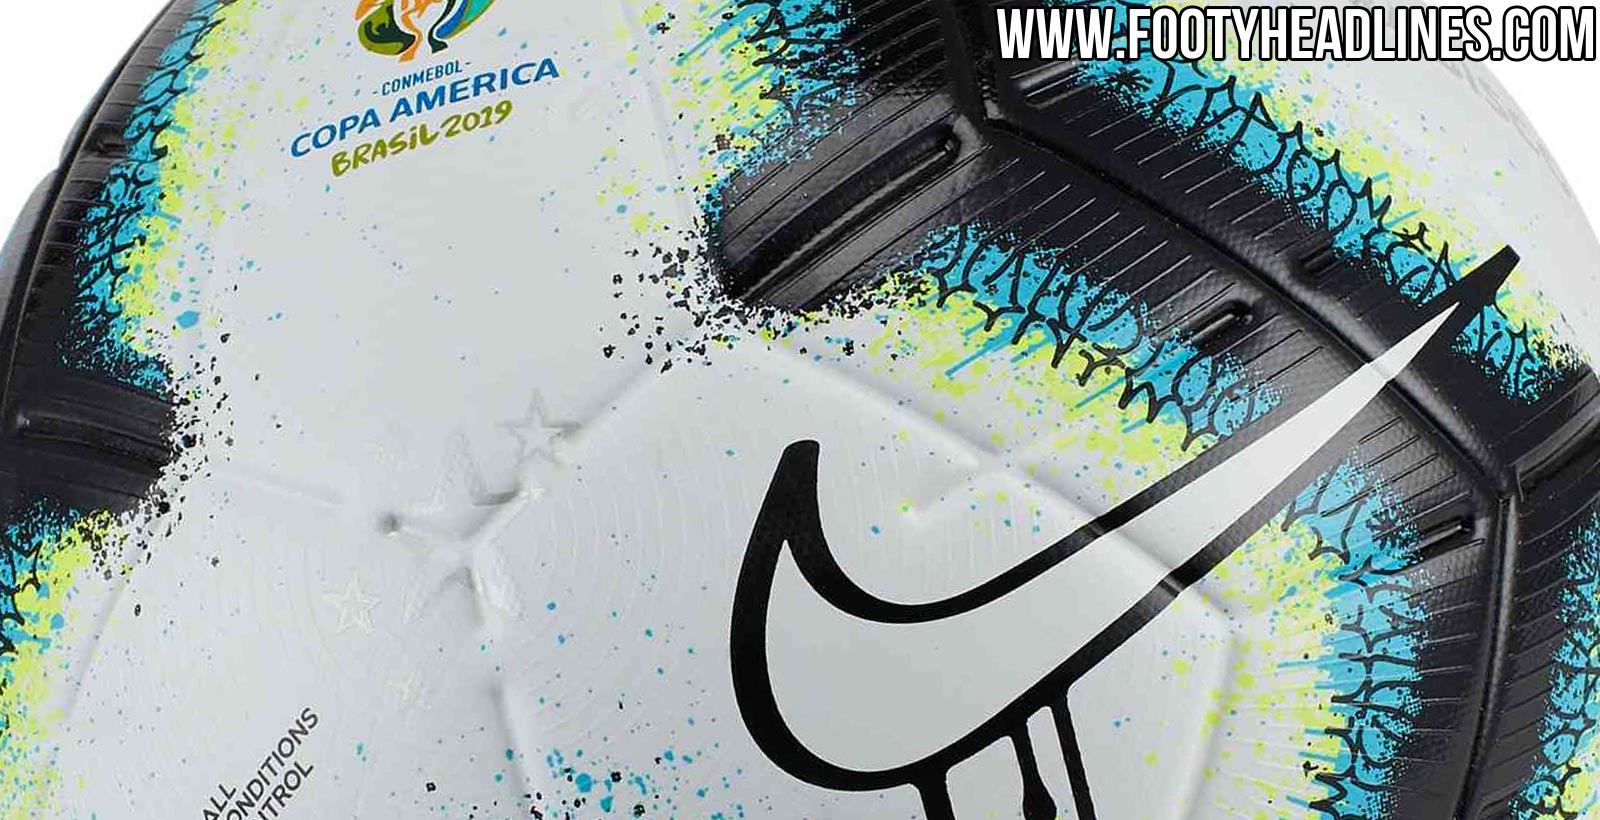 Have a bath Expressly lid Nike Rabisco 2019 Copa America Ball Released - Footy Headlines